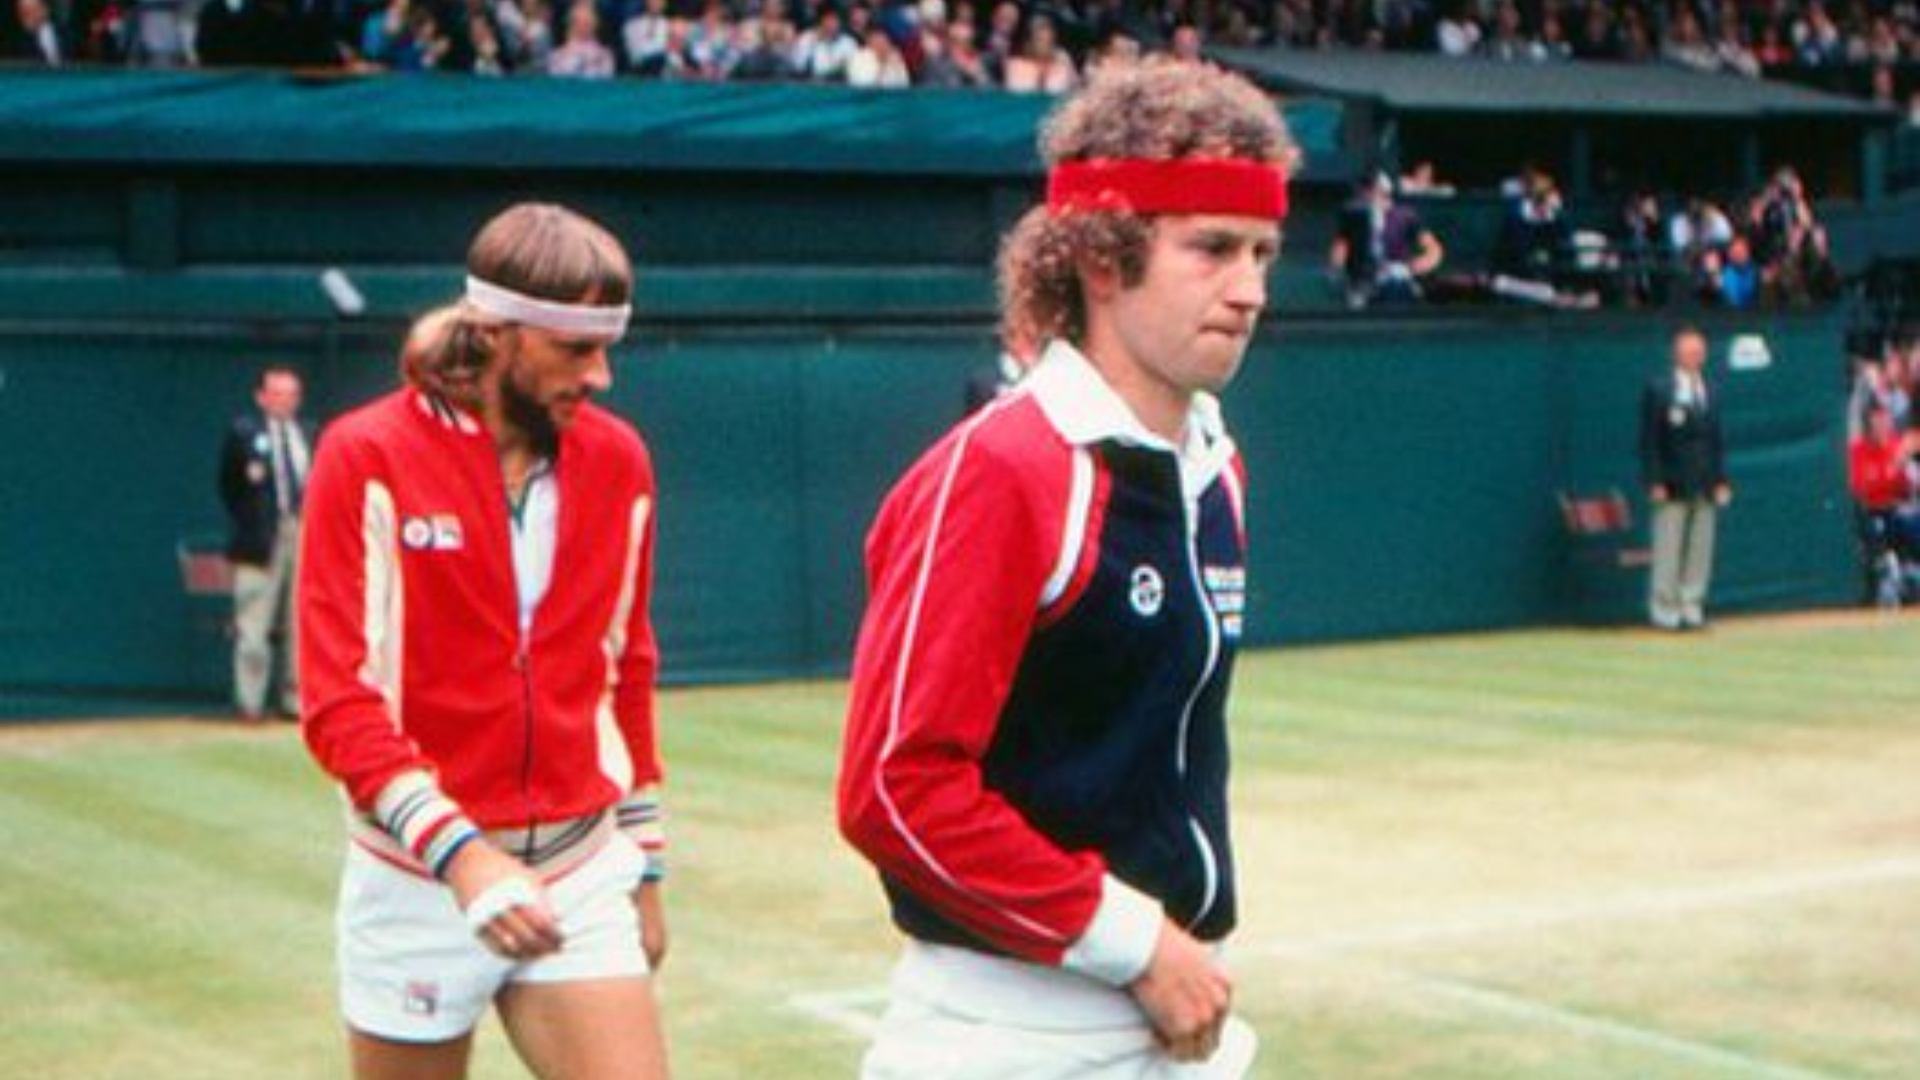 John McEnroe was notorious for his outbursts in Tennis and it earned him the nickname of 'Bad Boy of Tennis'.